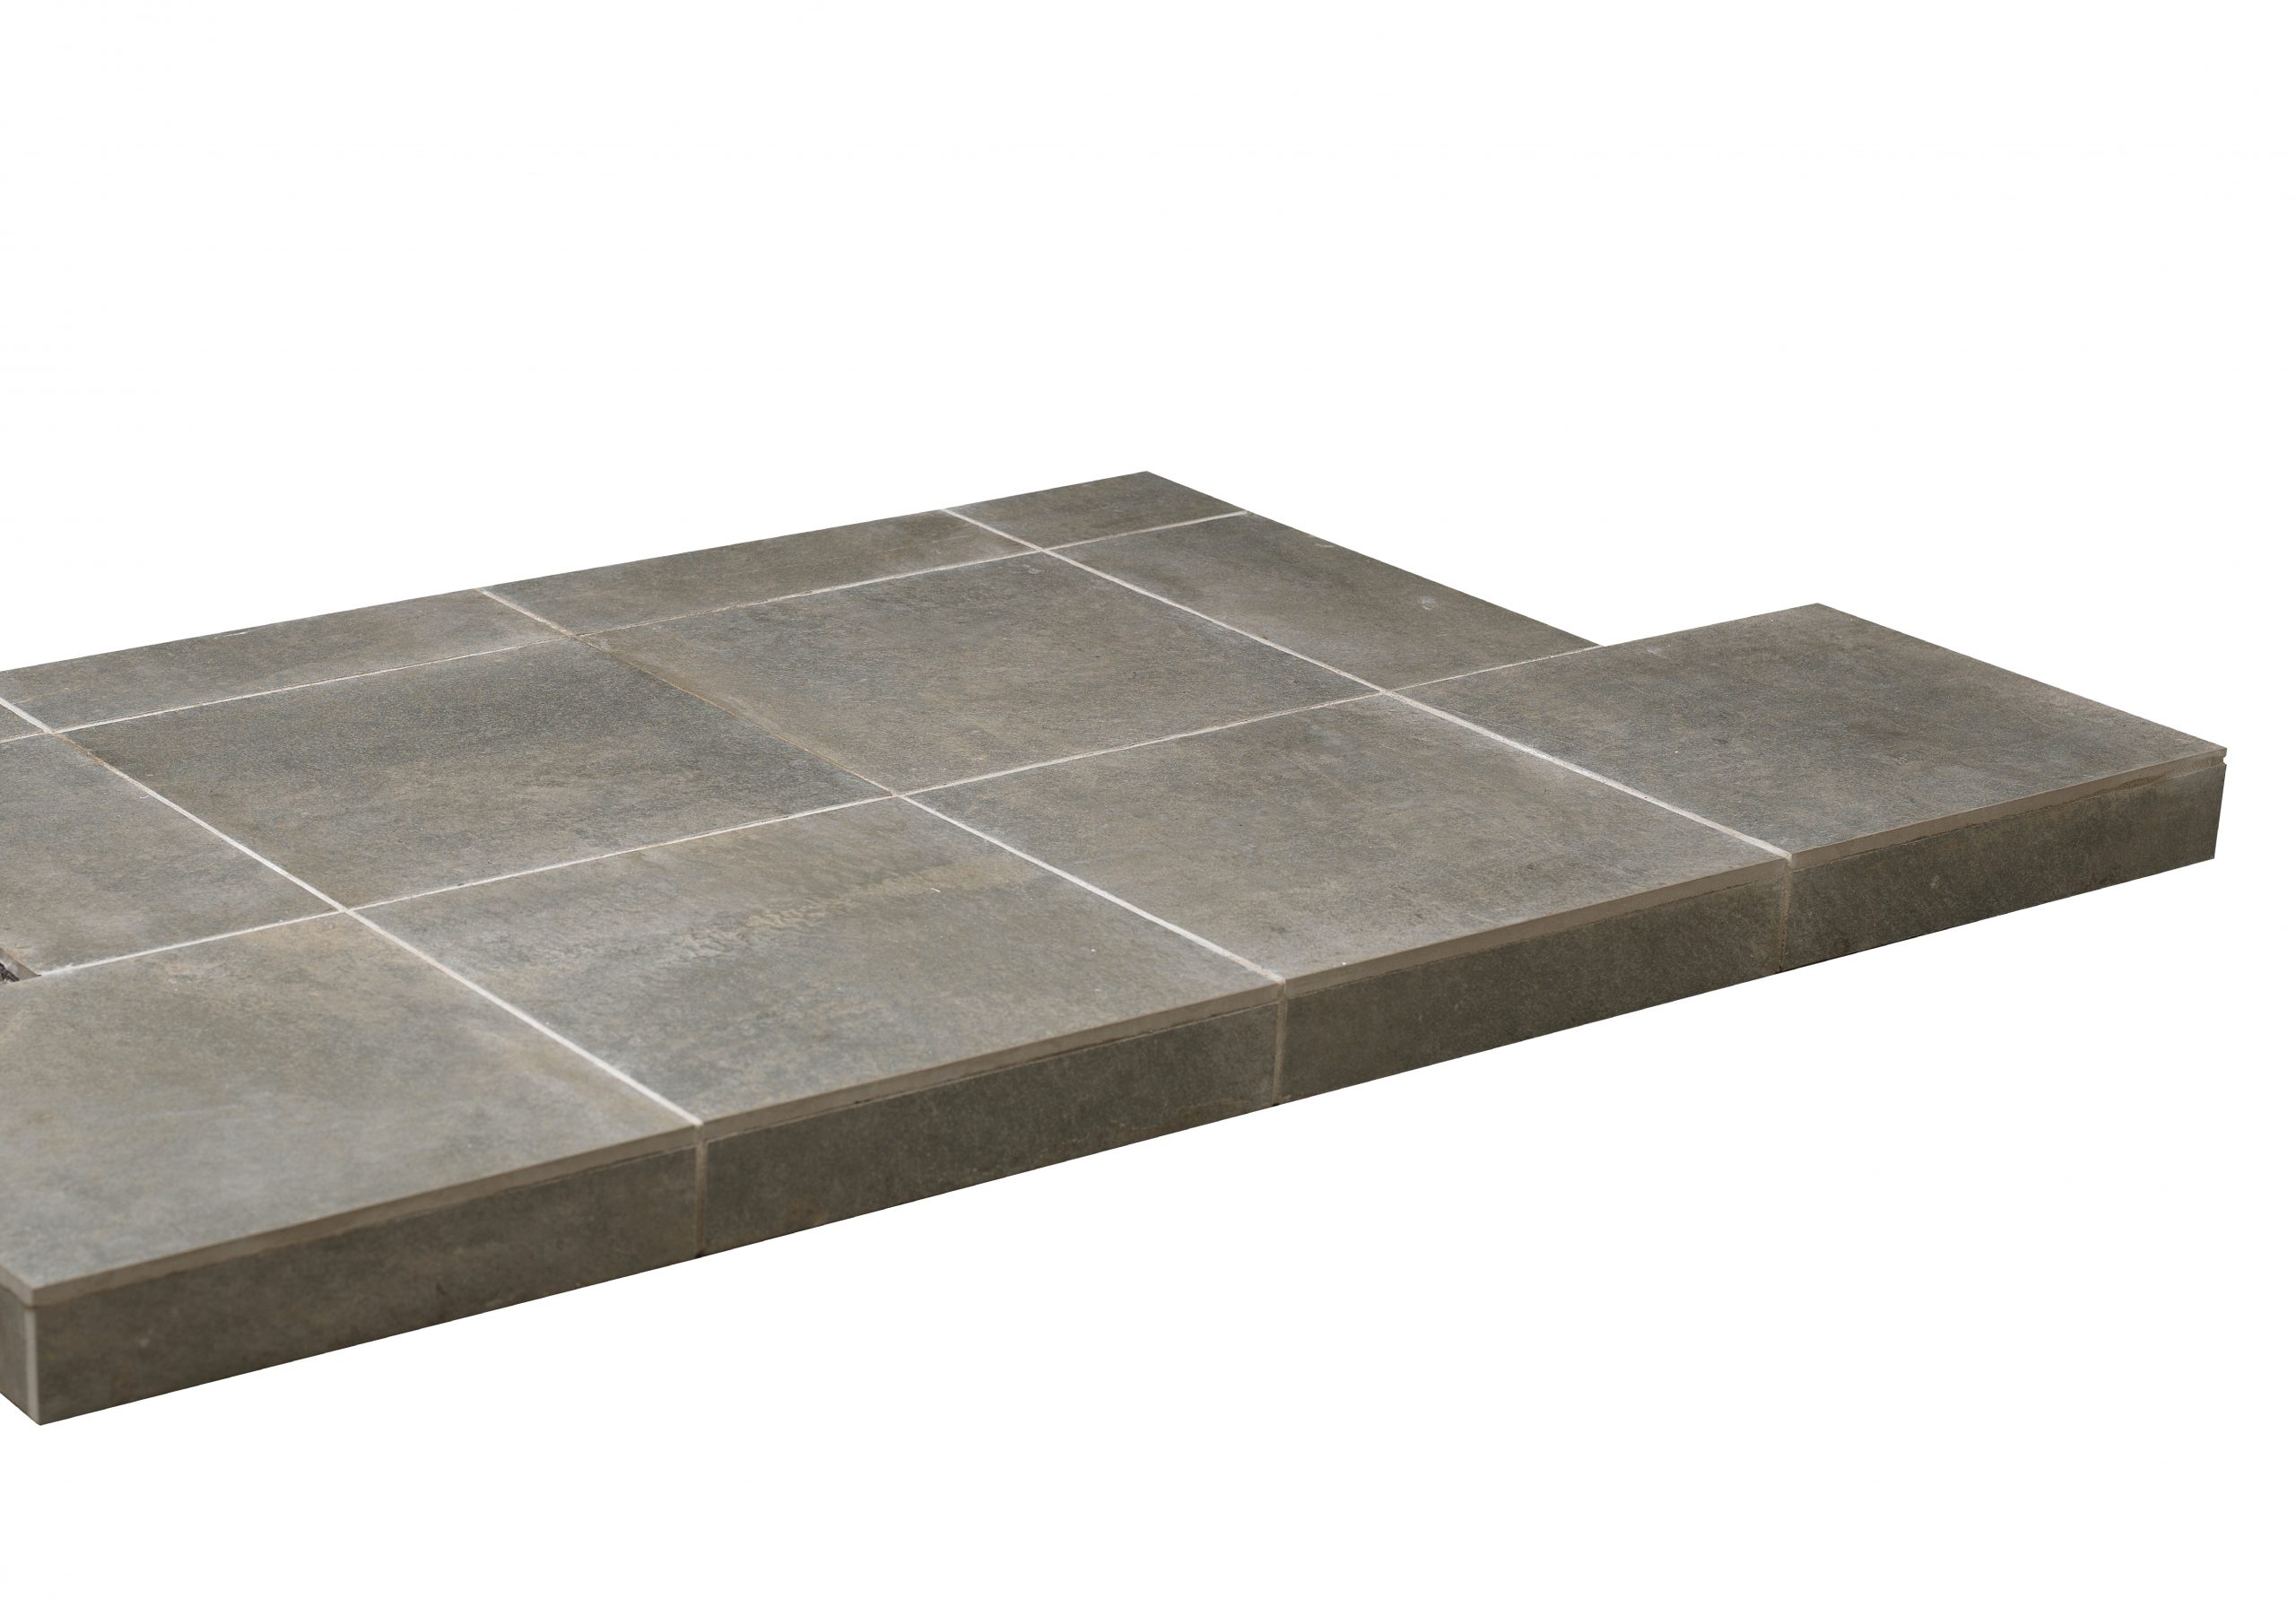 ANTHRACITE GREY TILED HEARTH